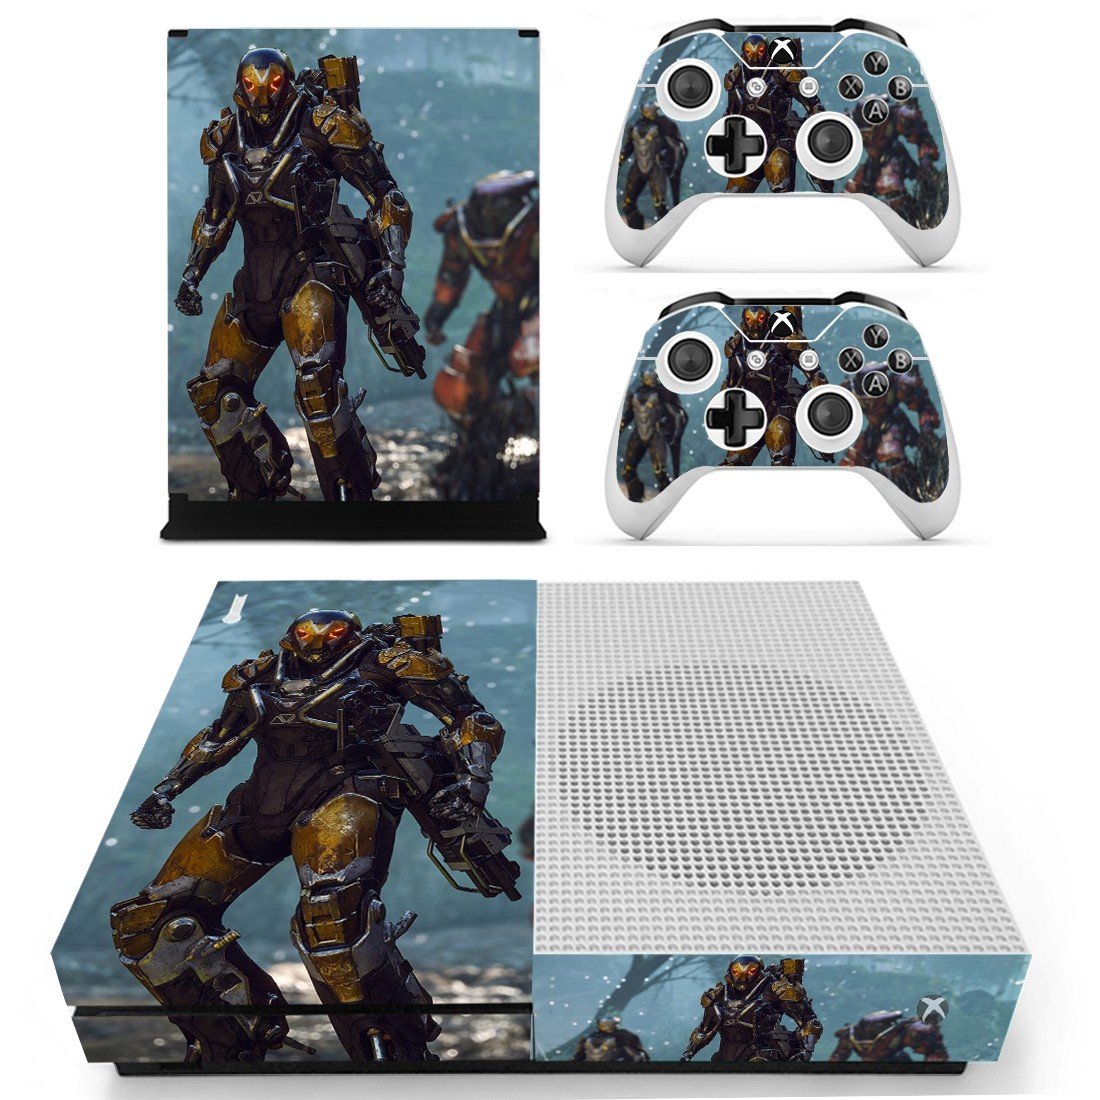 Anthem Sticker For Xbox One S And Controllers Design 2